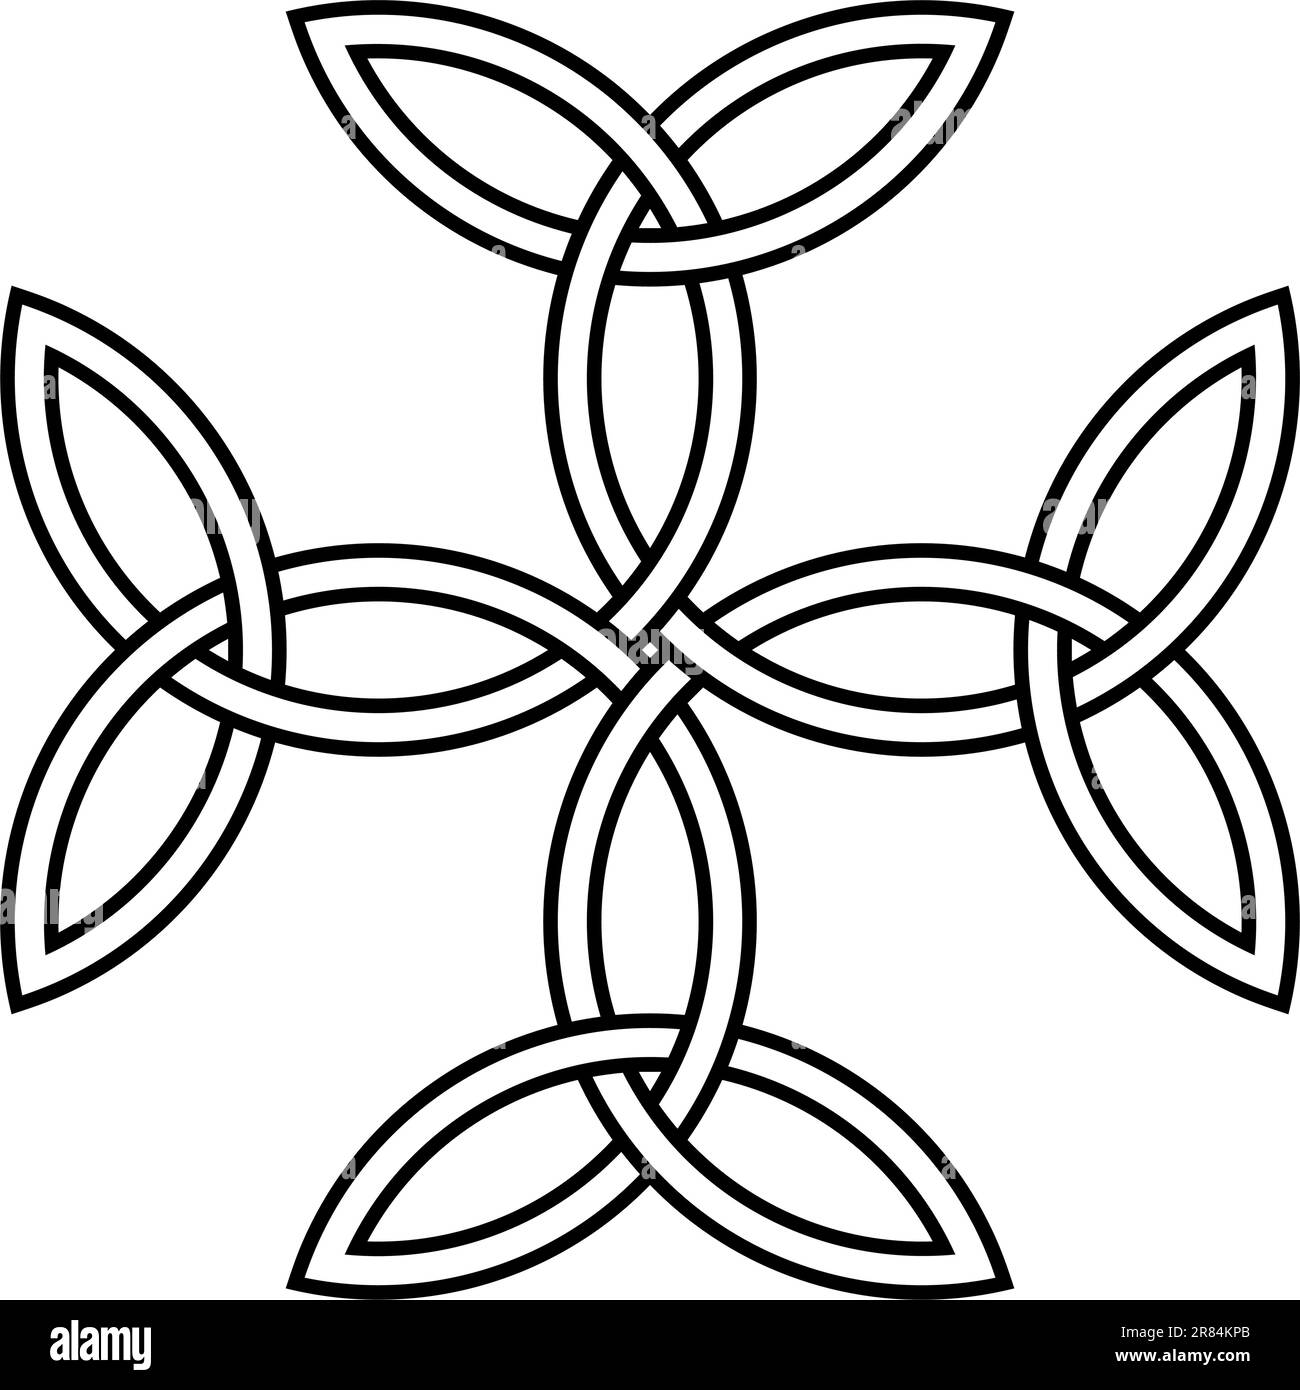 Carolingian Cross in black. Isolated background. Symbolizes unity, balance, and God. Abstract Middle Age illustration of an celtic symbol. Stock Vector